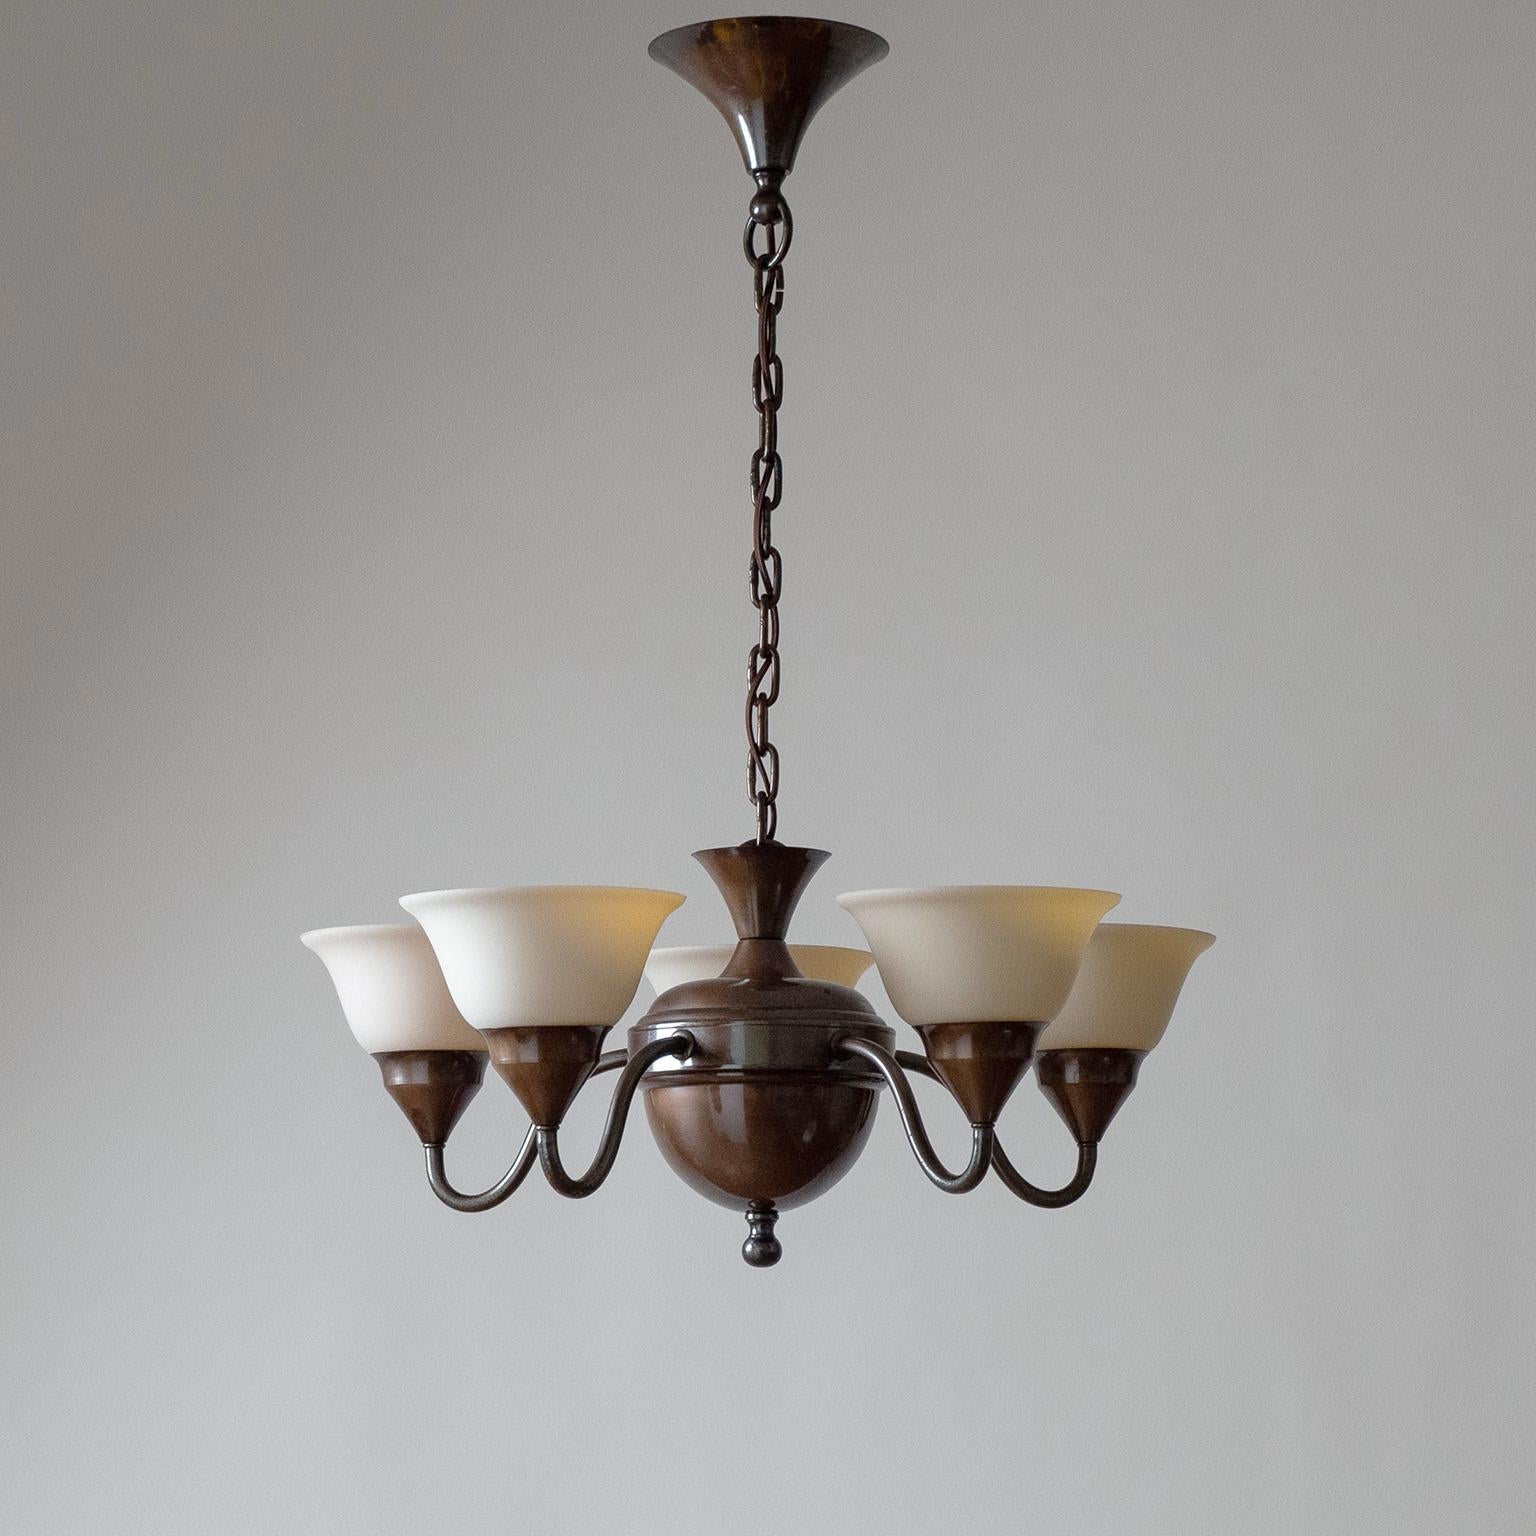 Swedish Patinated Brass Chandelier, 1920s, Enameled Glass For Sale 1